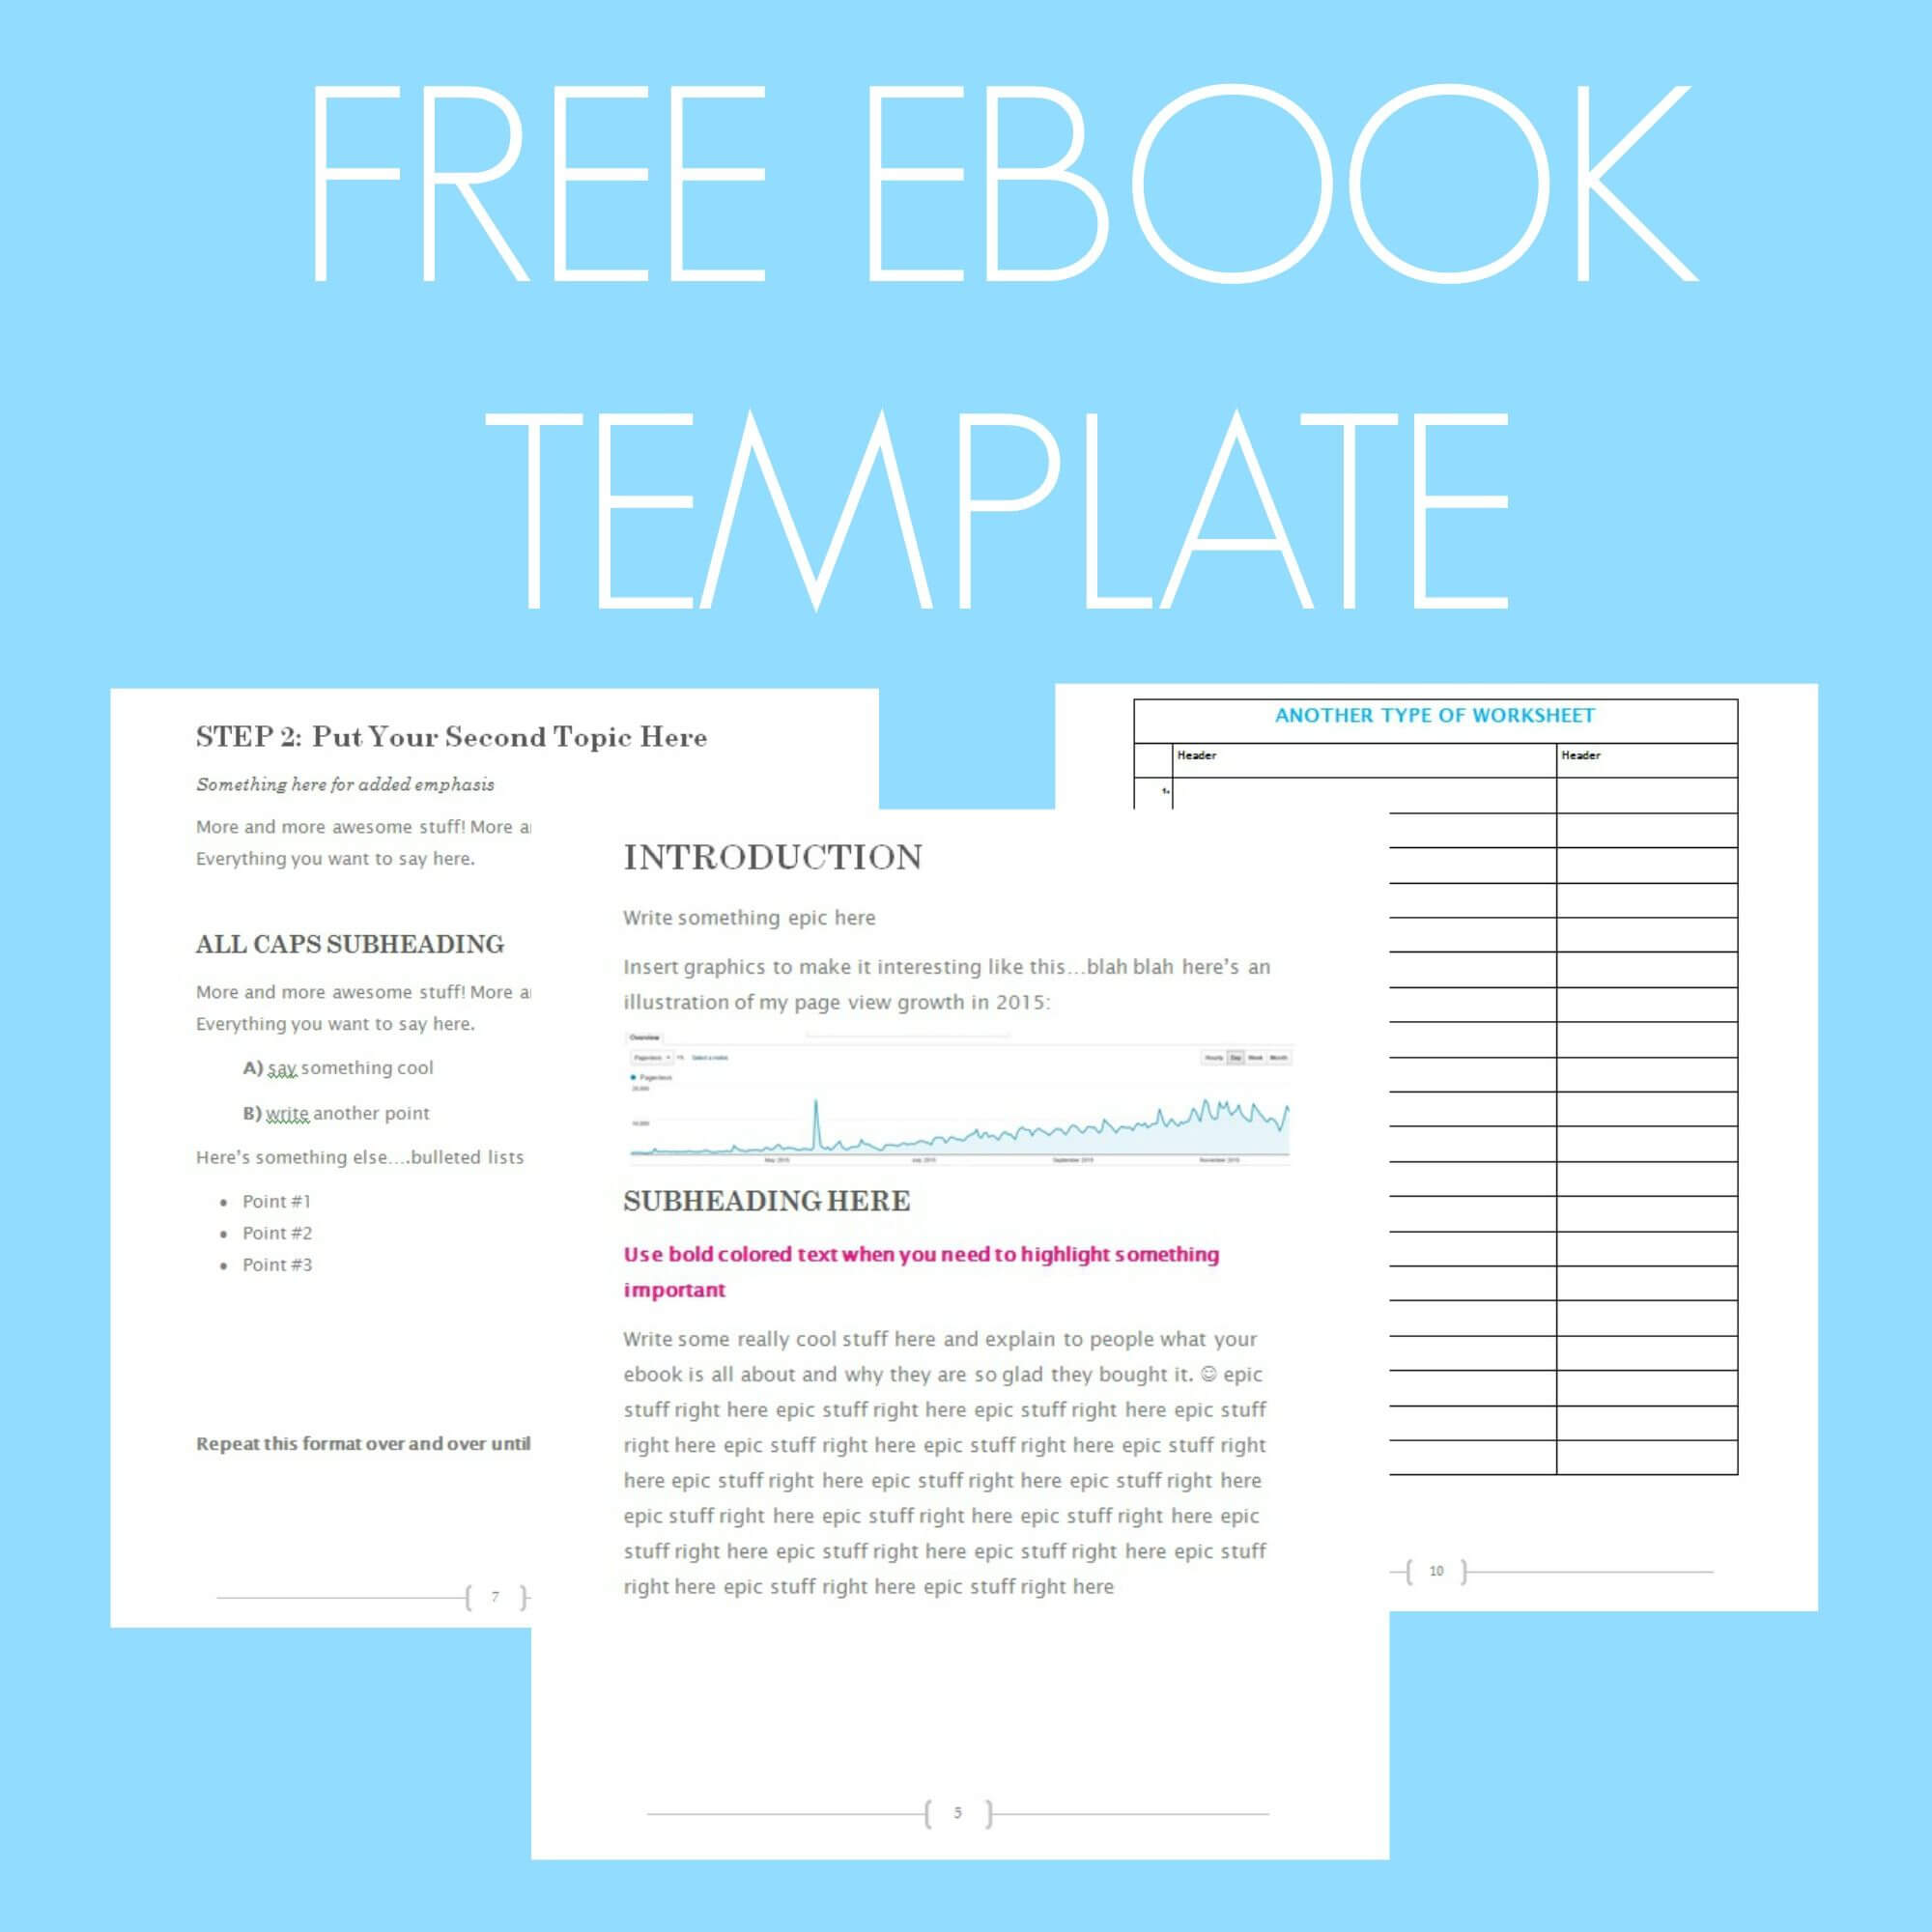 Free Ebook Template – Preformatted Word Document | Words Intended For Header Templates For Word